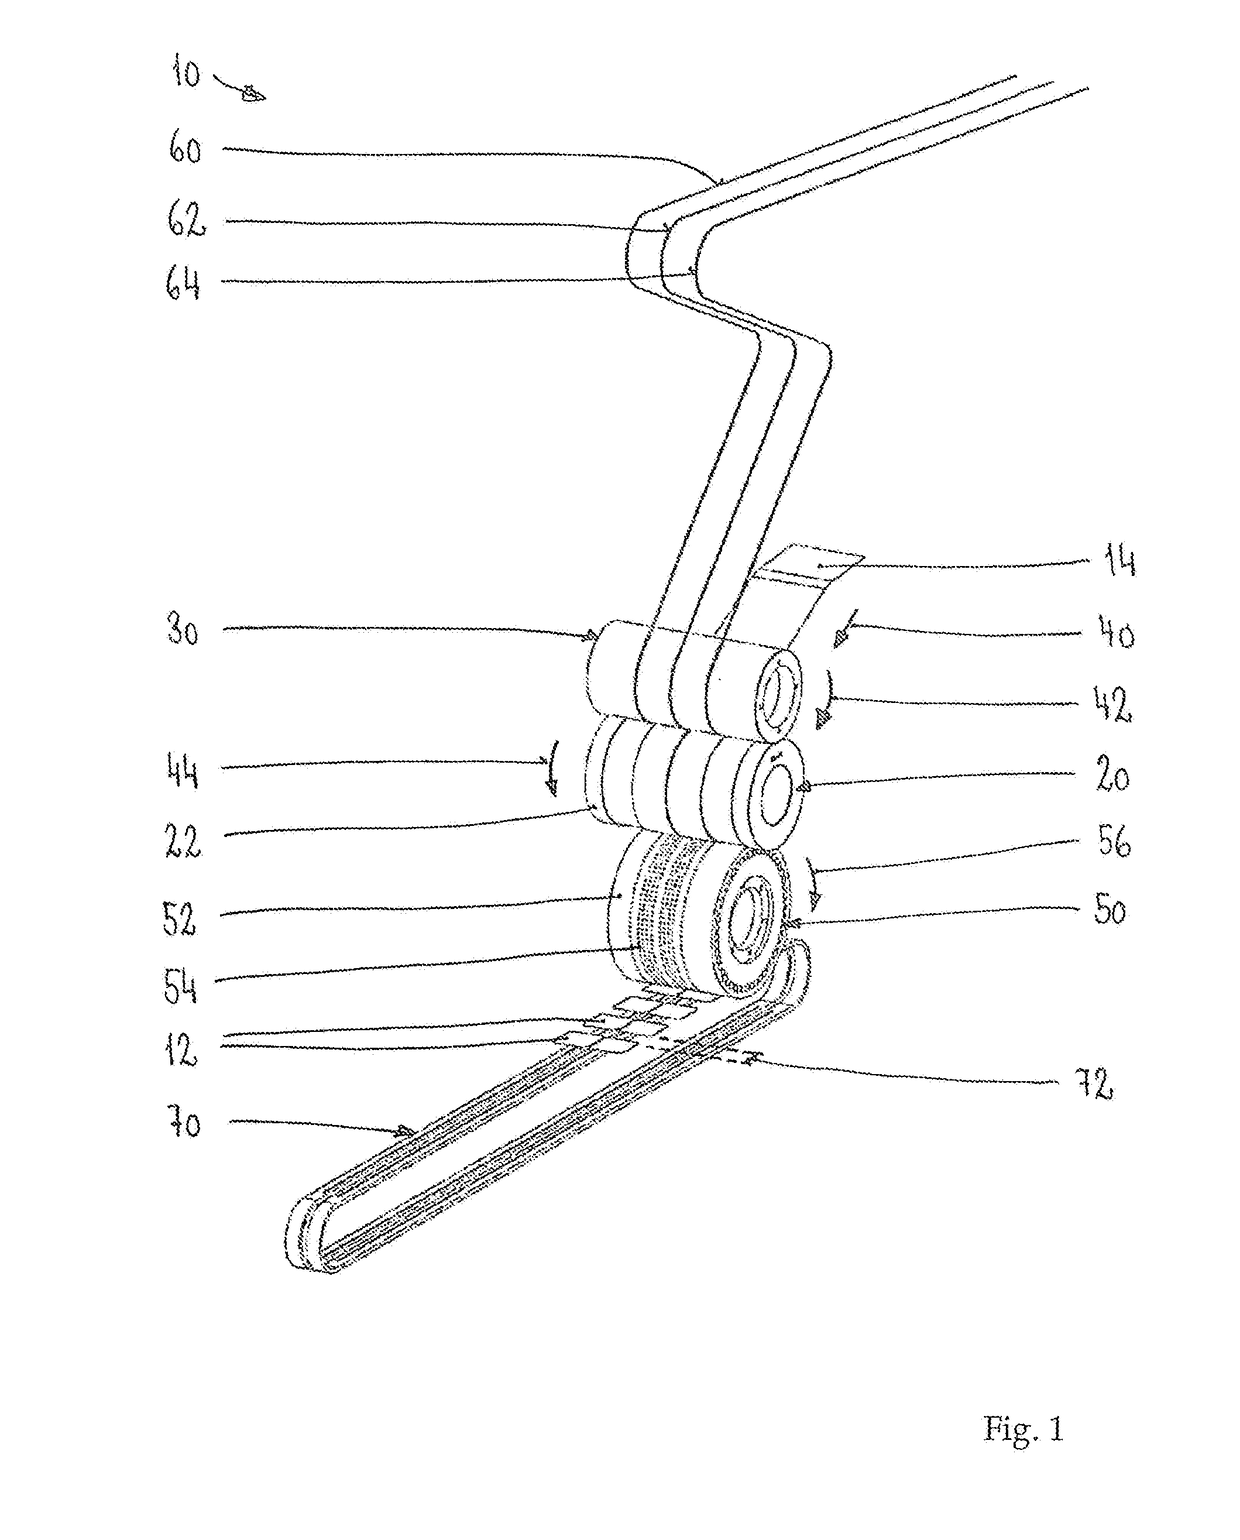 Device for releasing sections from a material web